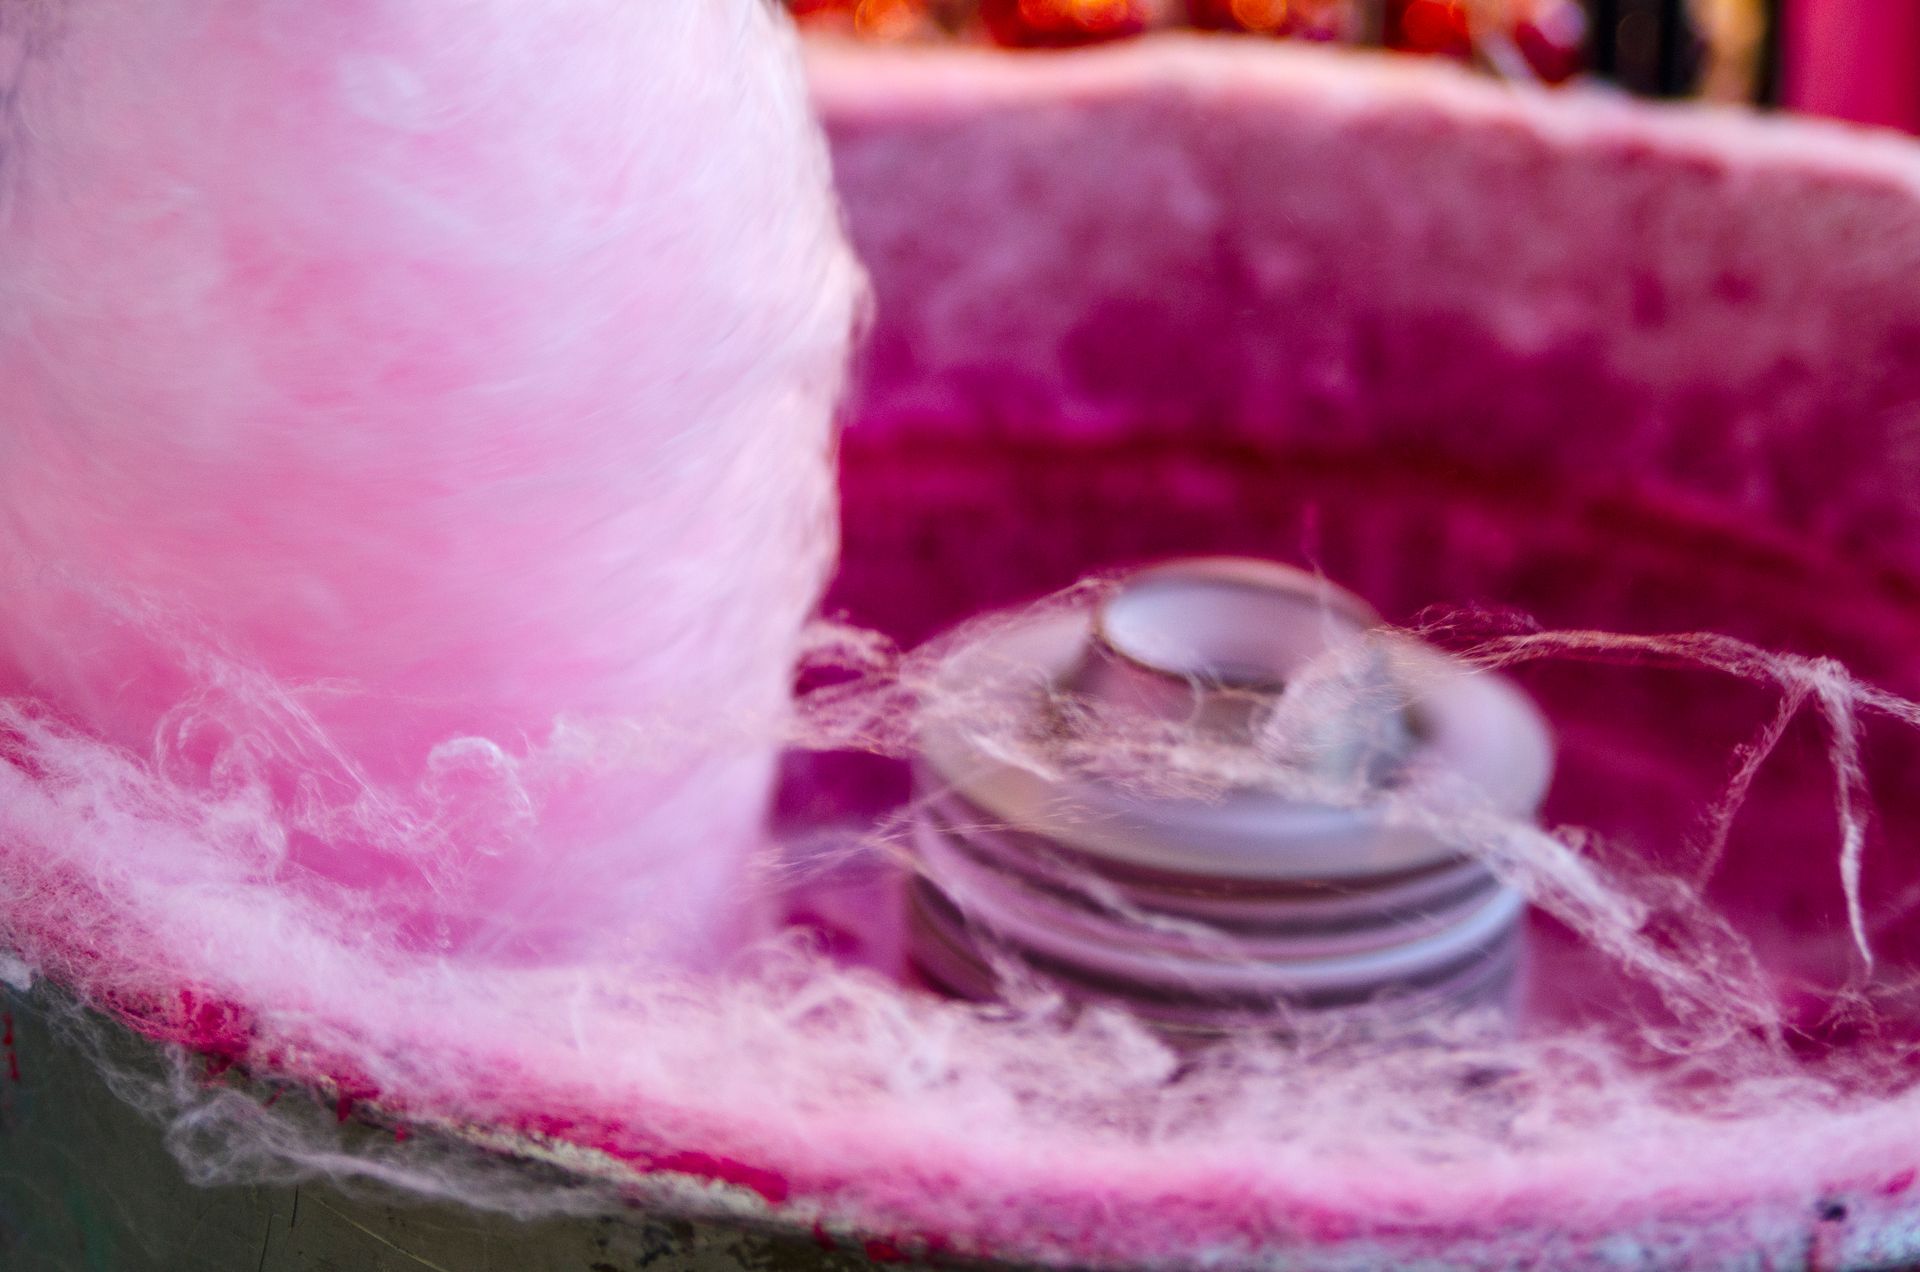 Pink cotton sweet in candy machine.